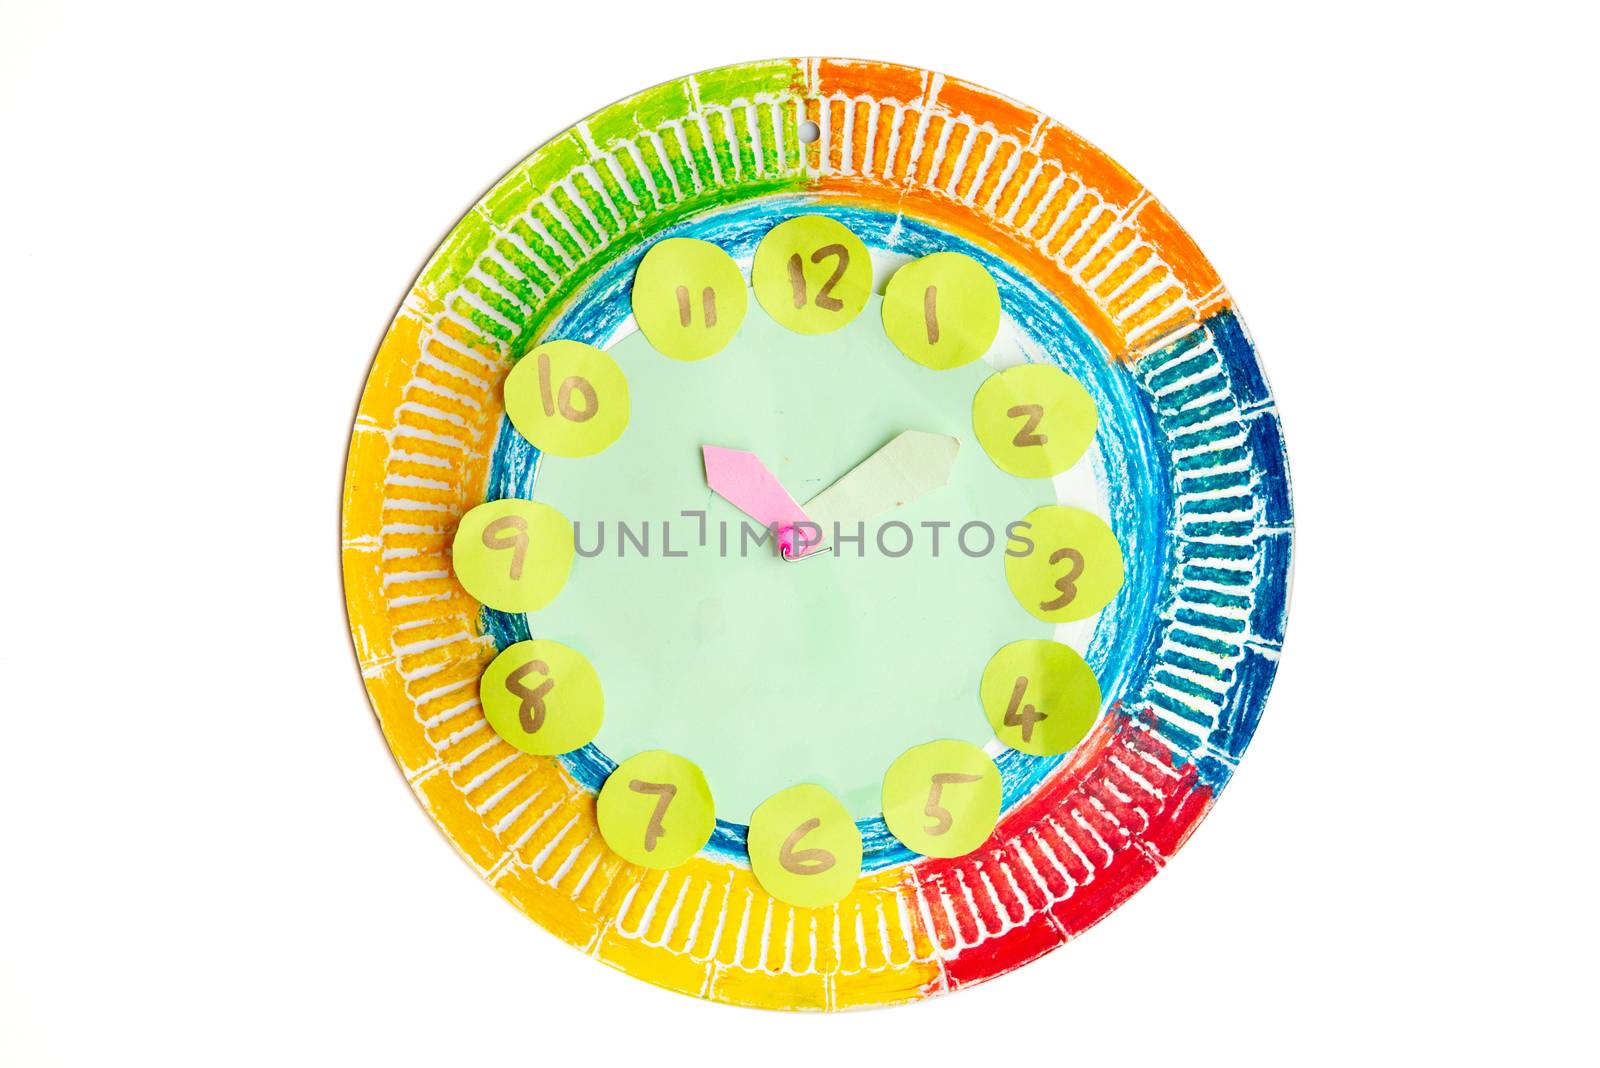 Colorful child handwork clock pointing at ten past two, isolated on white background